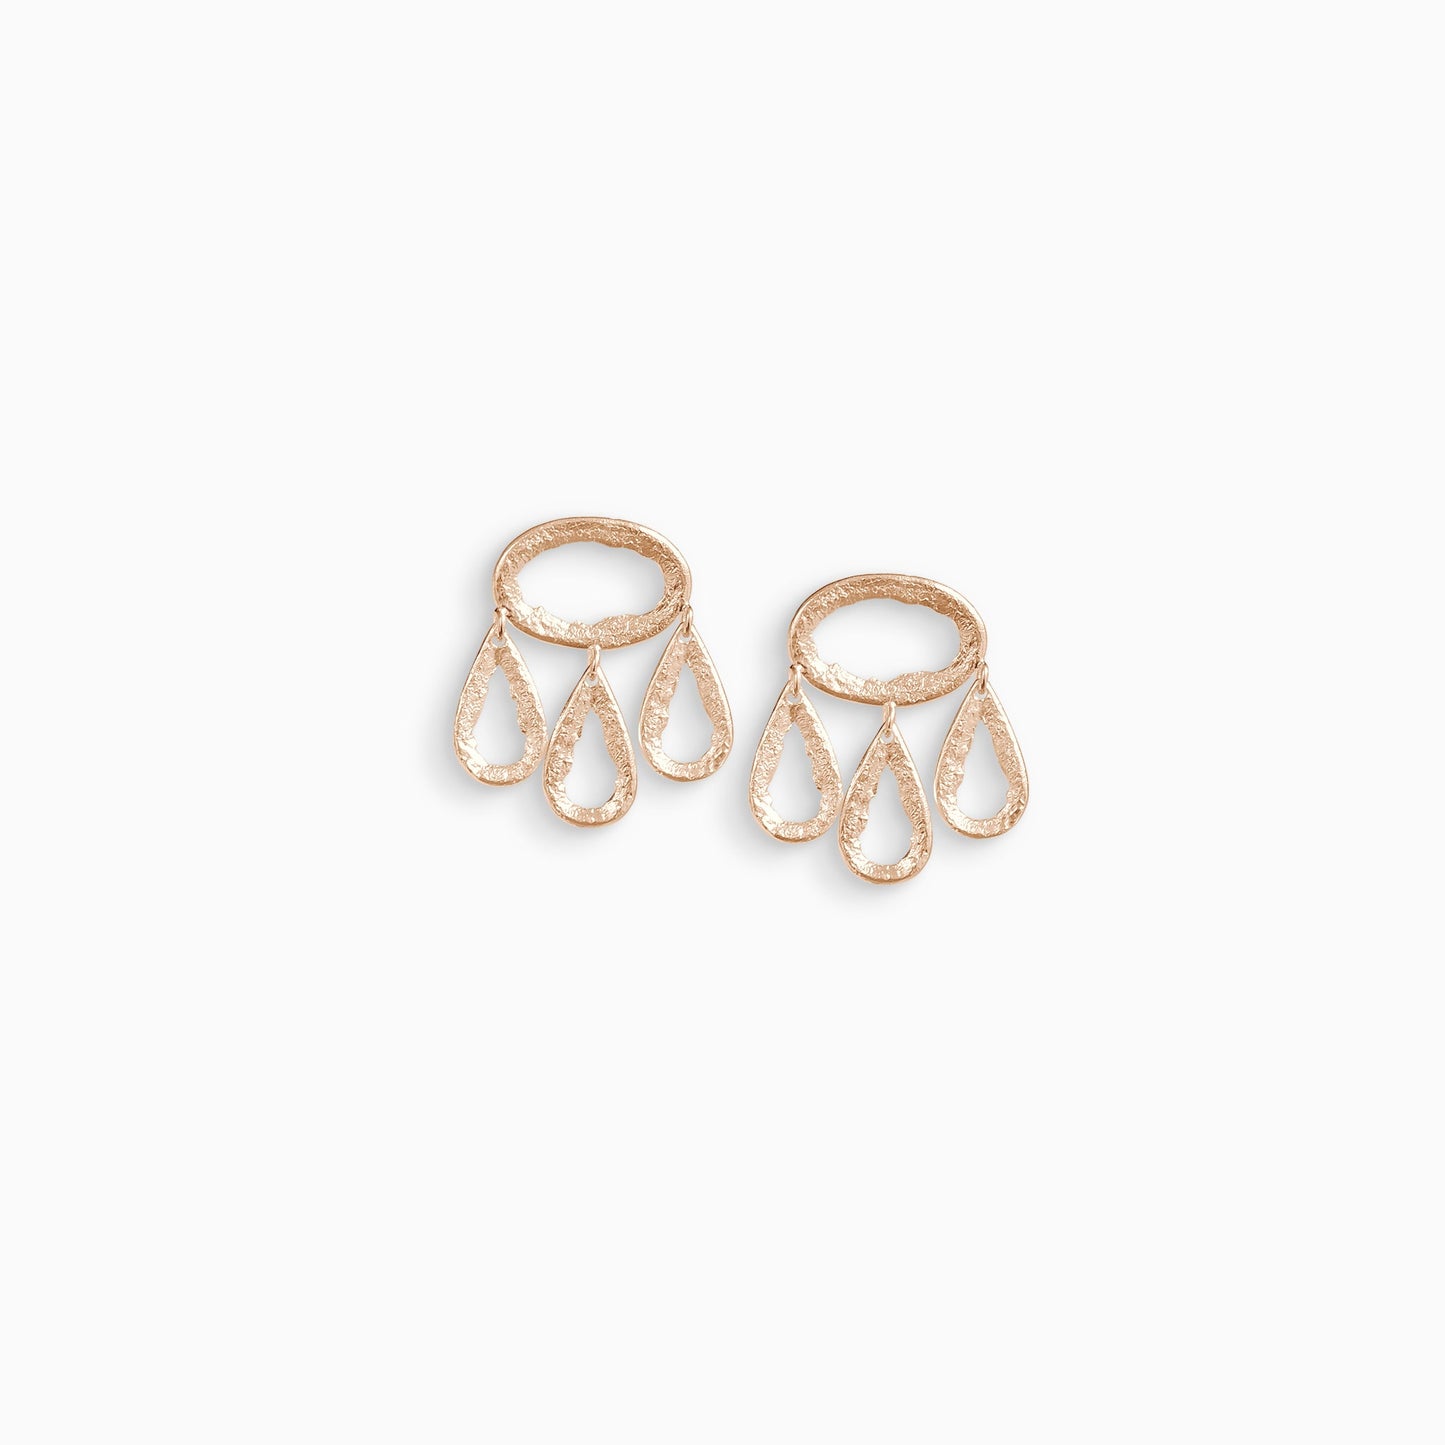 A pair of 18ct Fairtrade rose gold drop earrings. 3 articulating small teardrop shapes hang hang from a horizontal oval shape with a stud ear fastening. These open shapes have a strong organic texture and are smooth on the outside edges with fragmented inside edges. 28mm length. 25mm width.